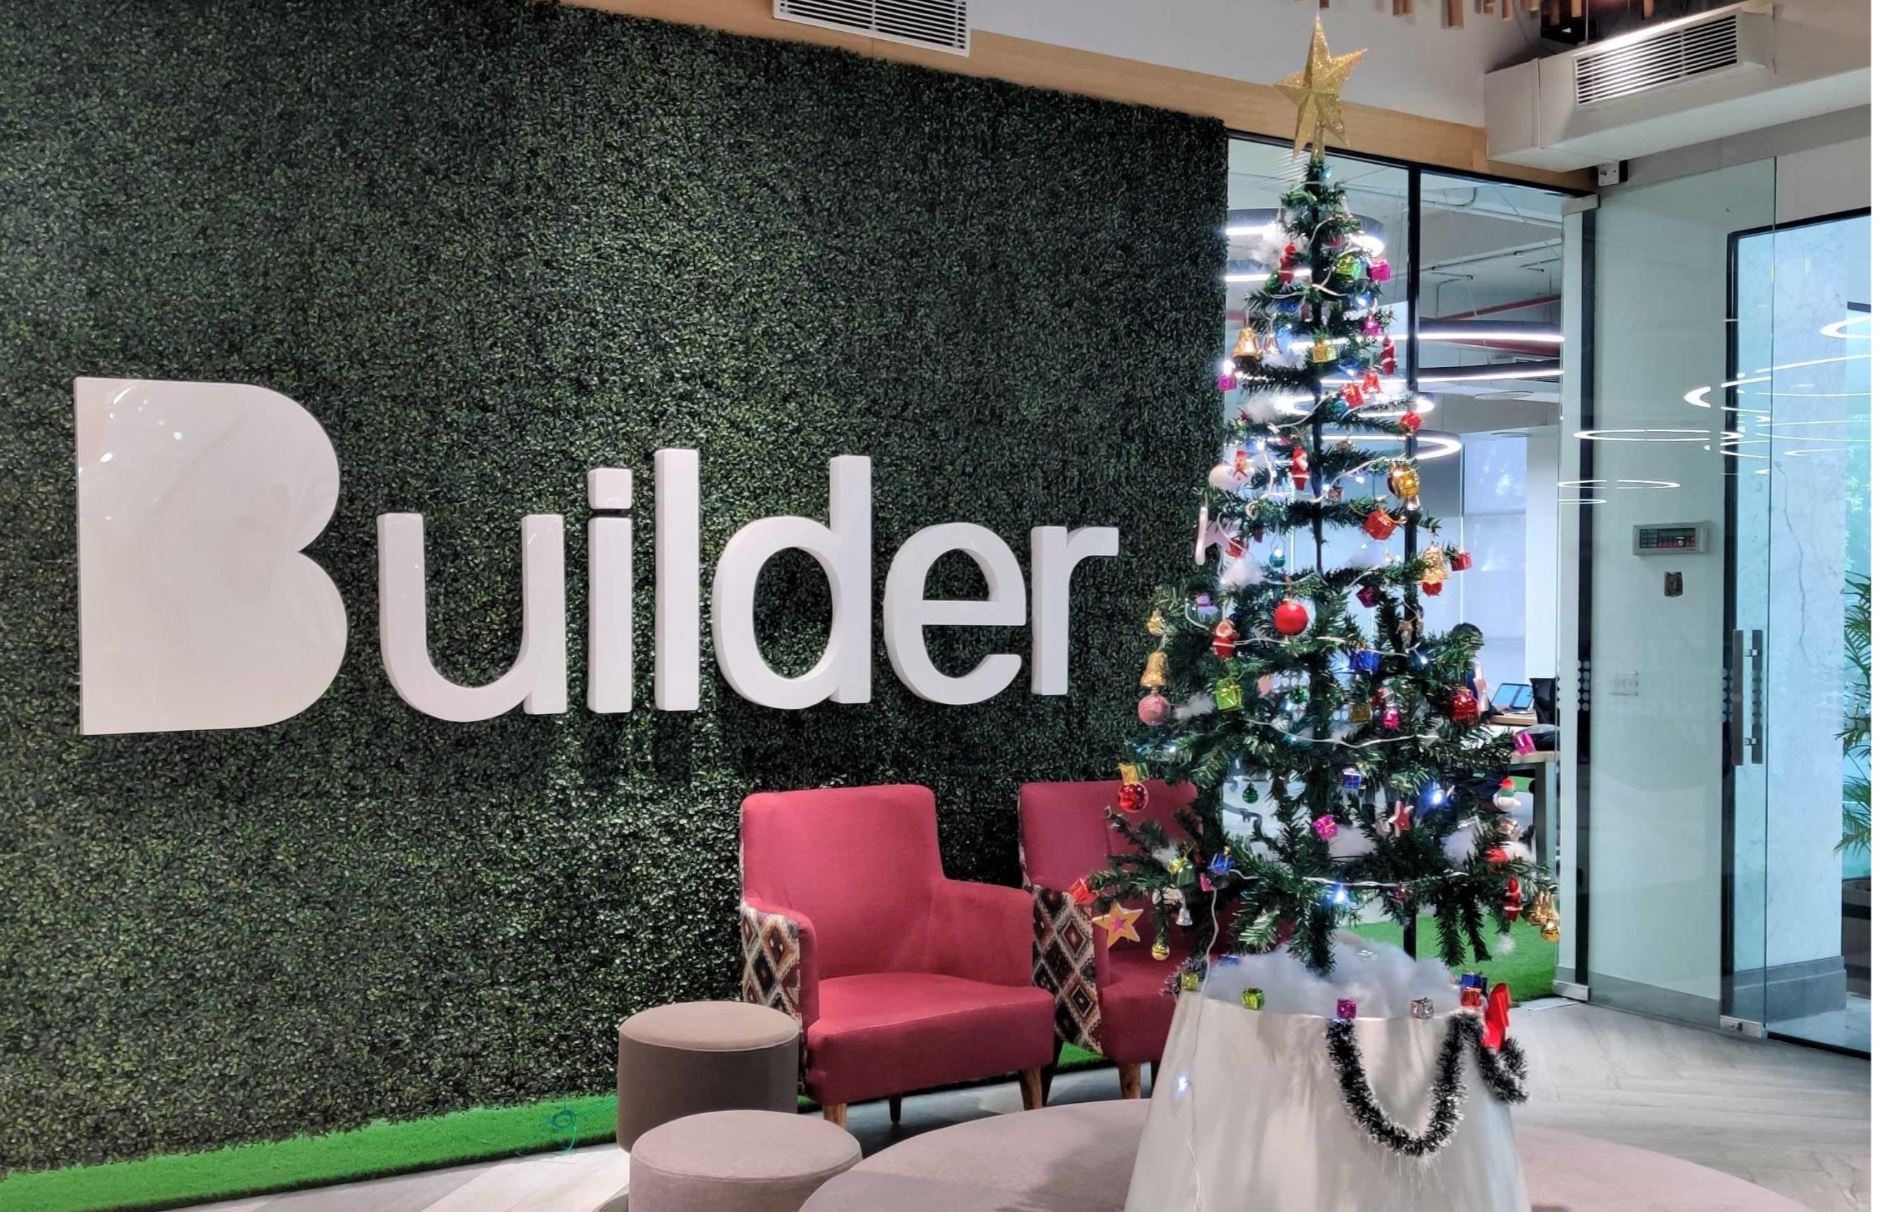 Words from Our Wizard: Holiday Updates from Sachin Dev Duggal